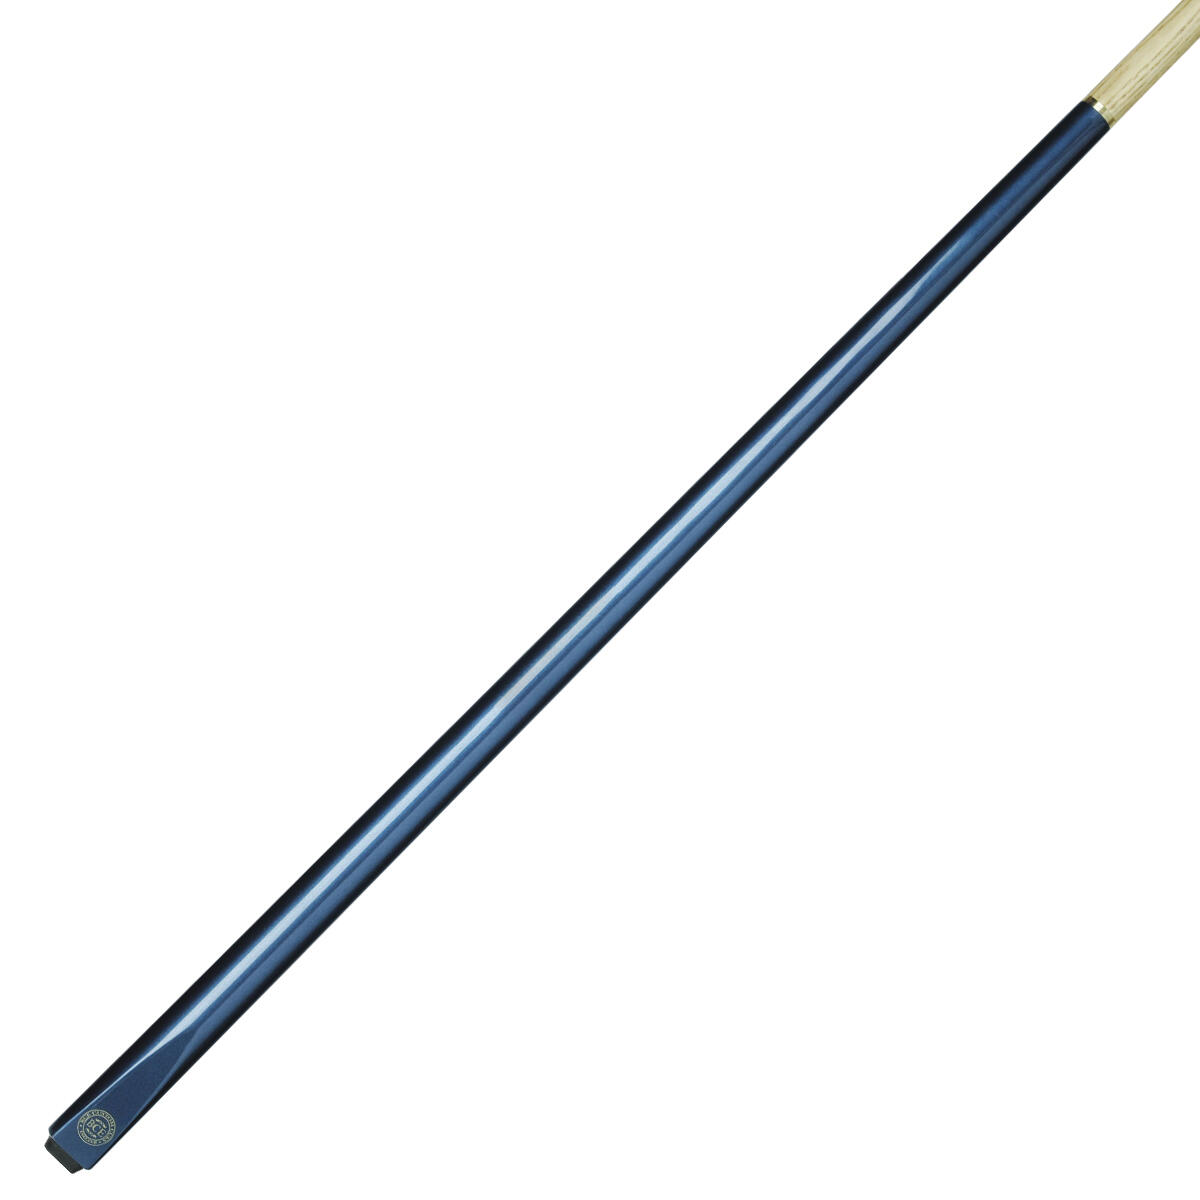 BCE 2 Piece Ash Snooker/ Pool Cue - 145cm with 9.5mm tip 1/5